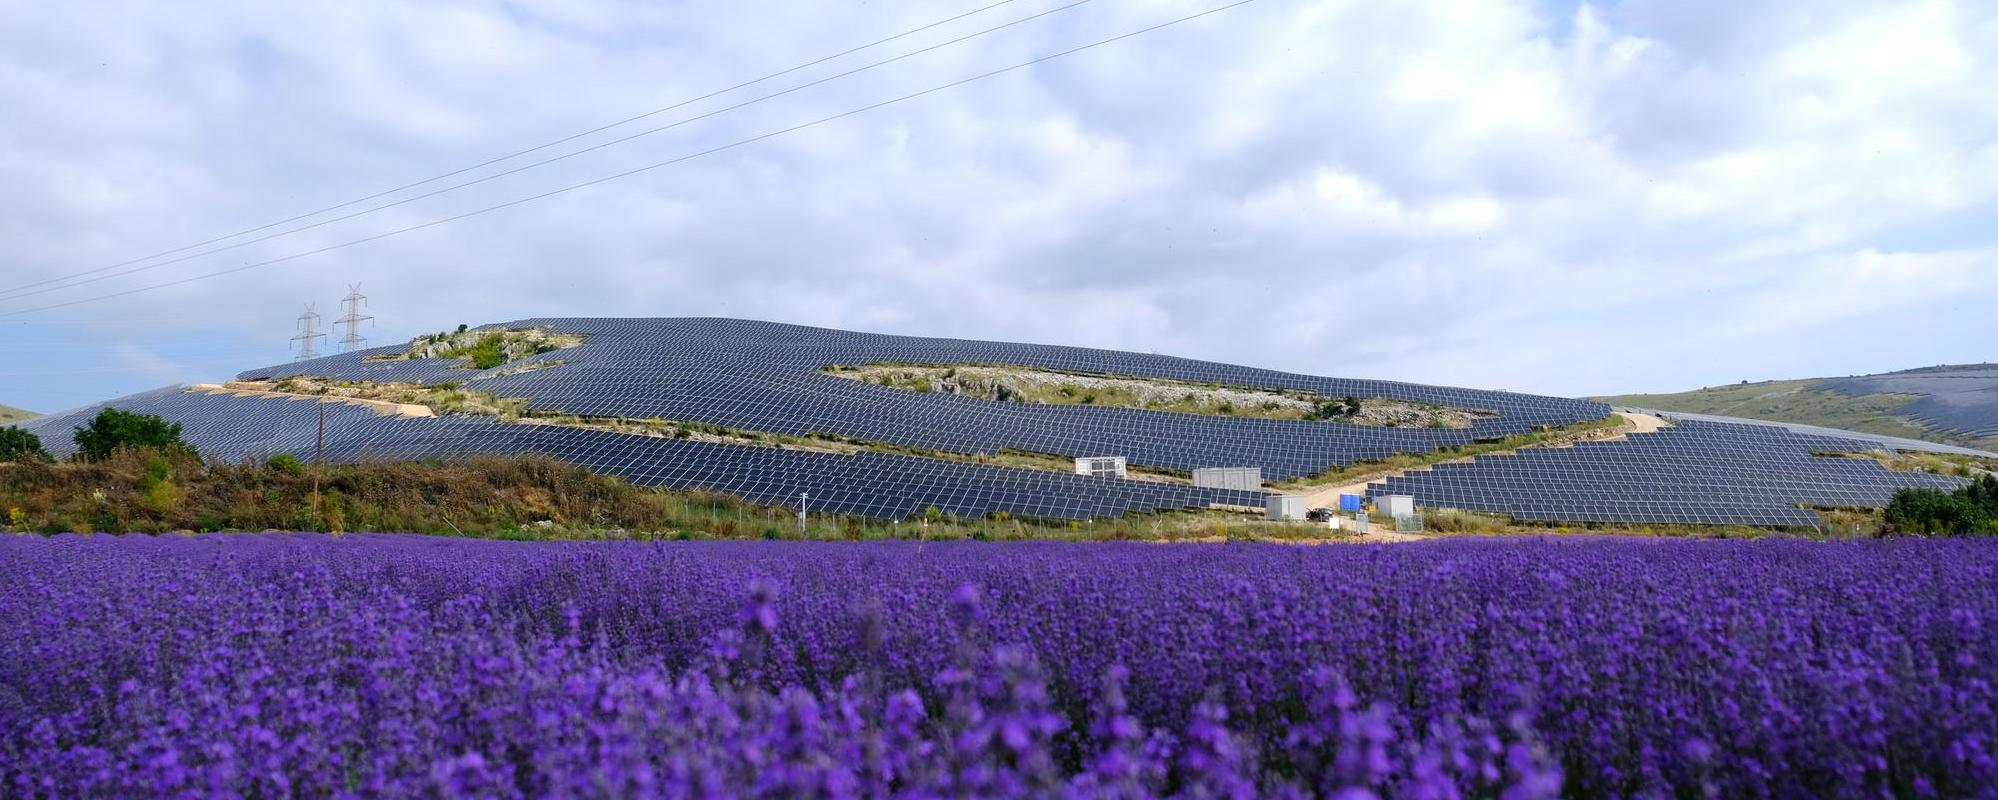 Kozani solar farm in Greece, with a field of purple flowers growing in the foreground